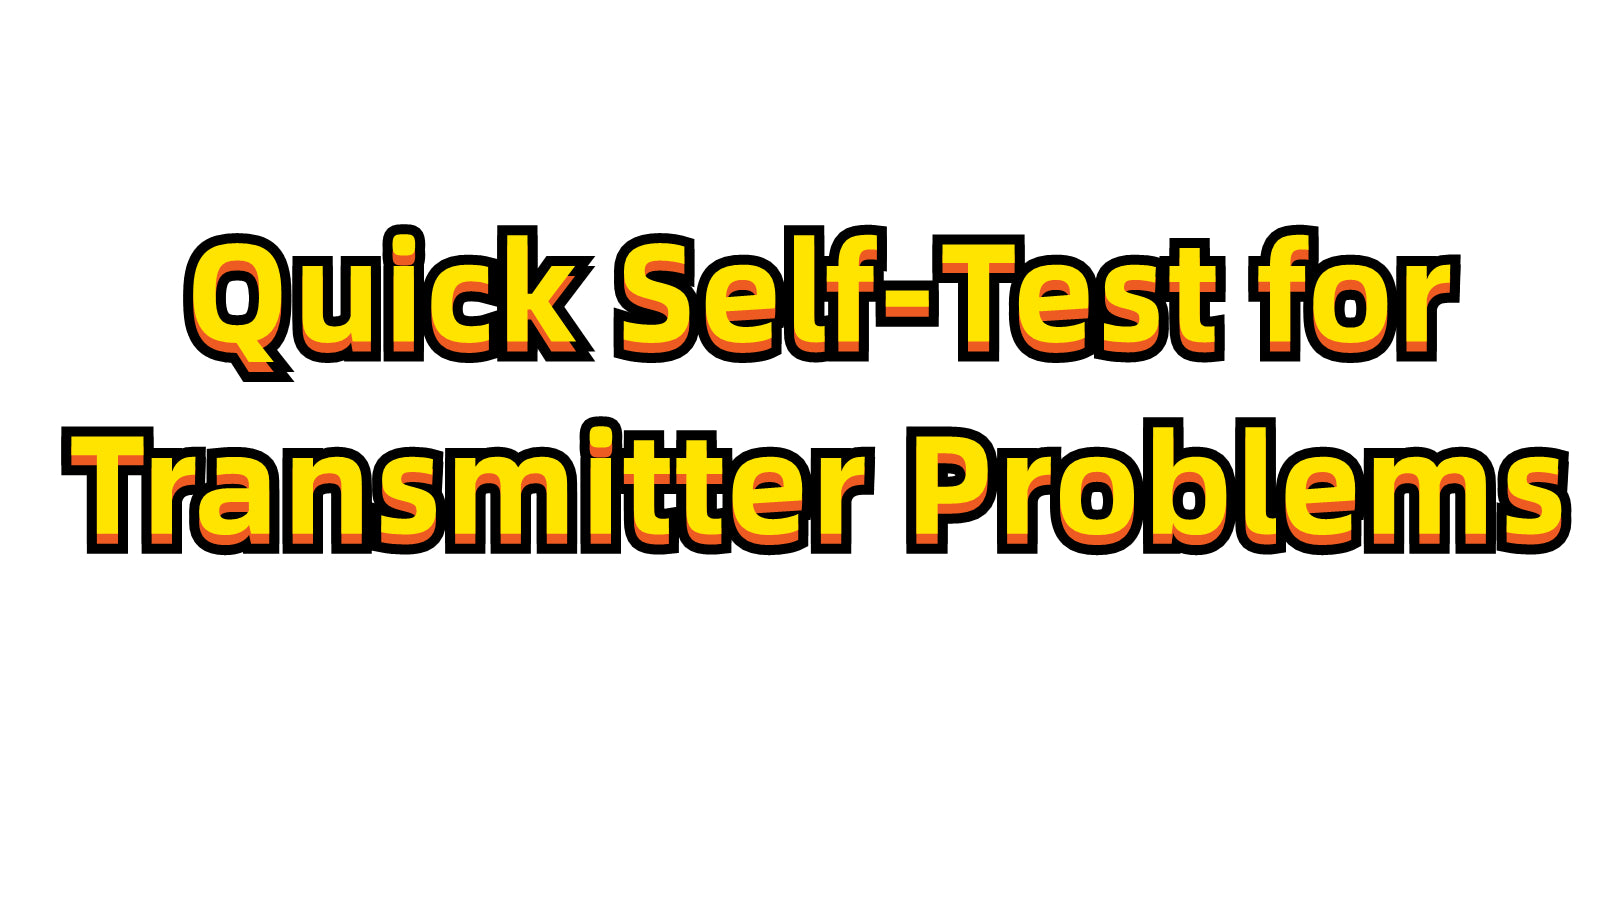 Quick Self-Test for Transmitter Problems